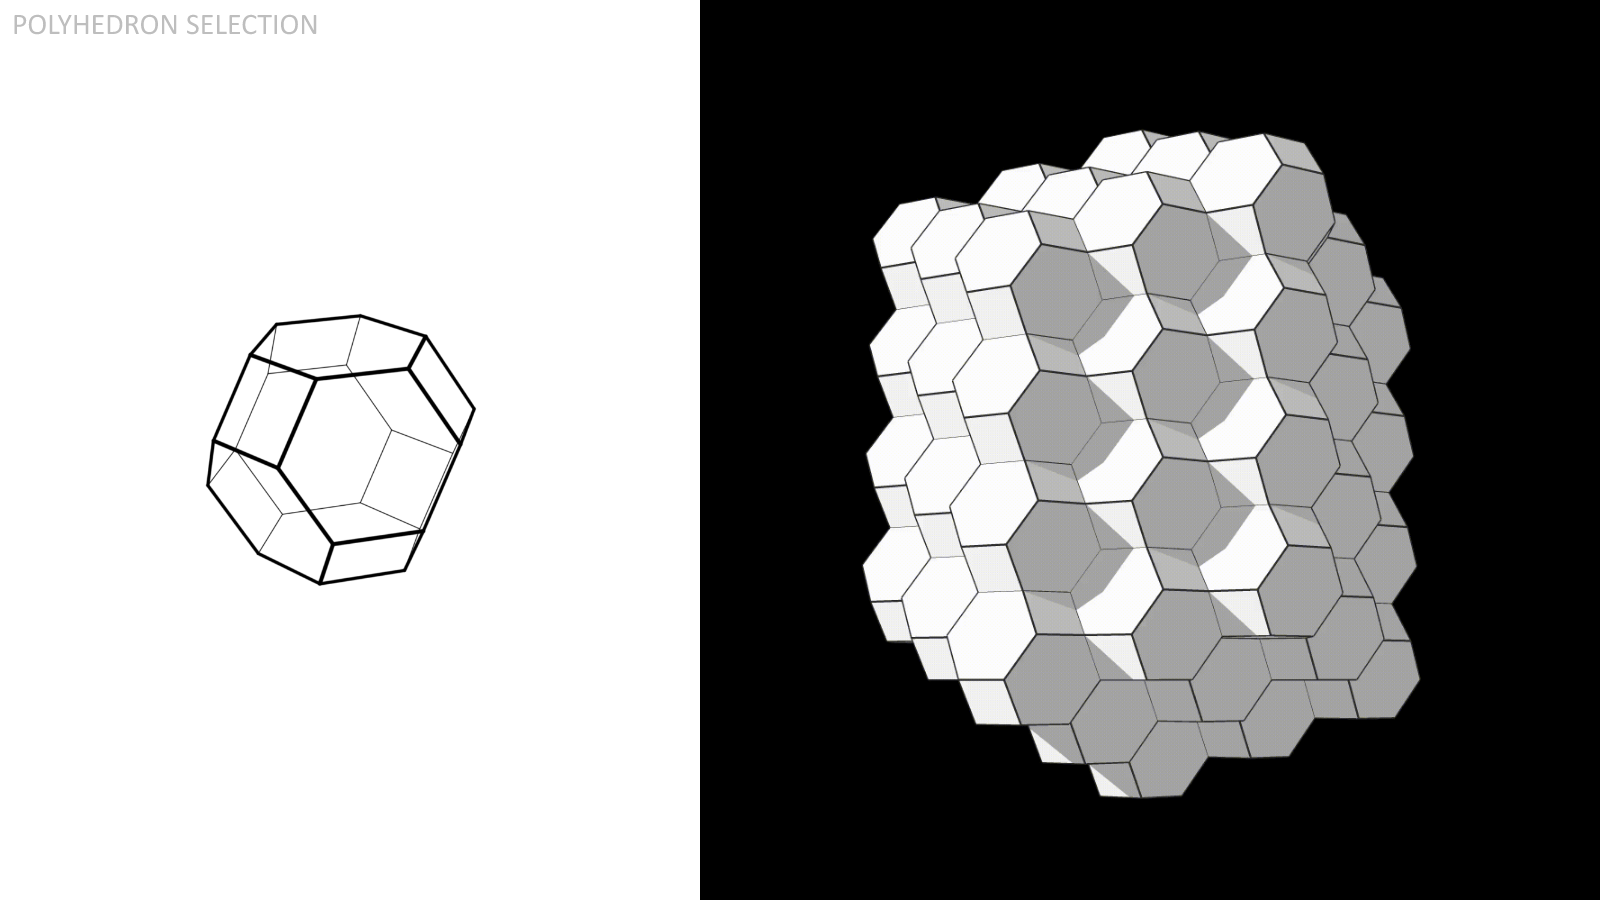  The Truncated Octahedron, composed of (8) regular hexagons and (6) squares. 